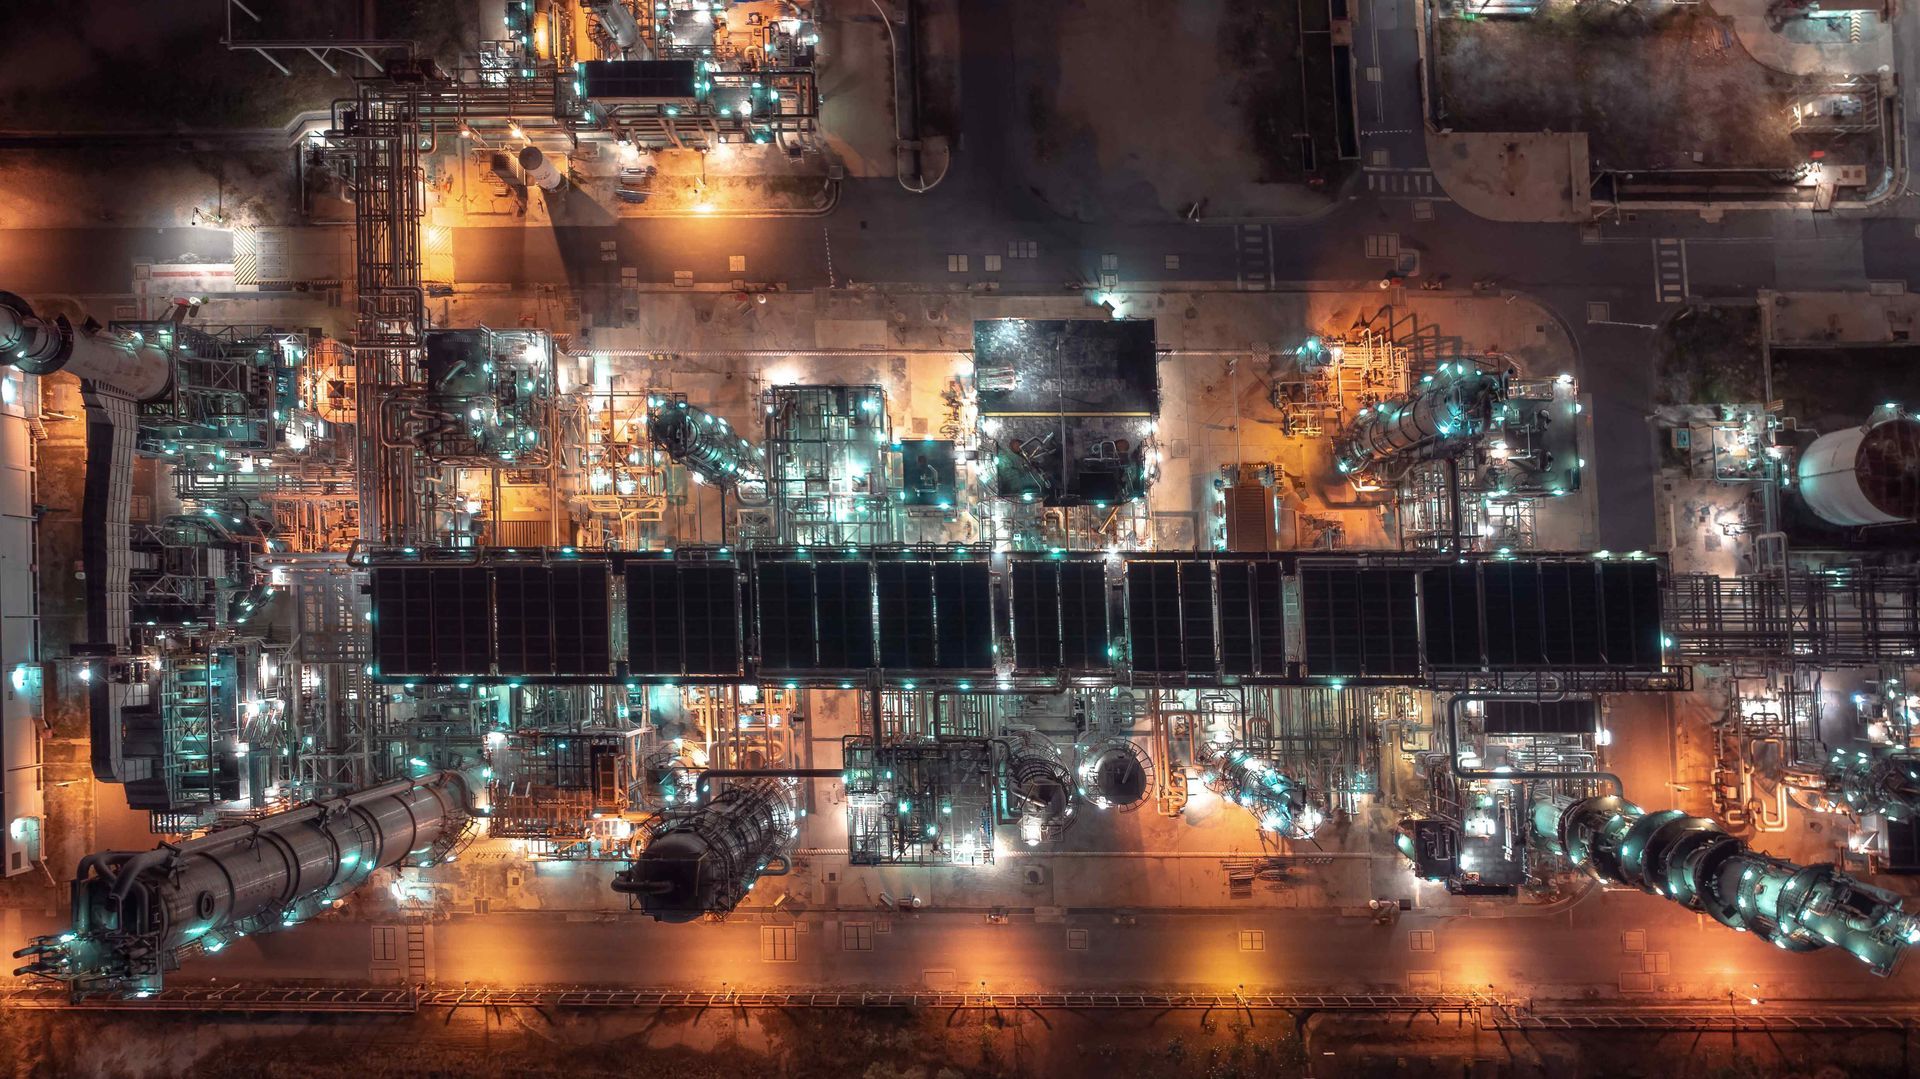 Drone Videography image of an industrial complex in California